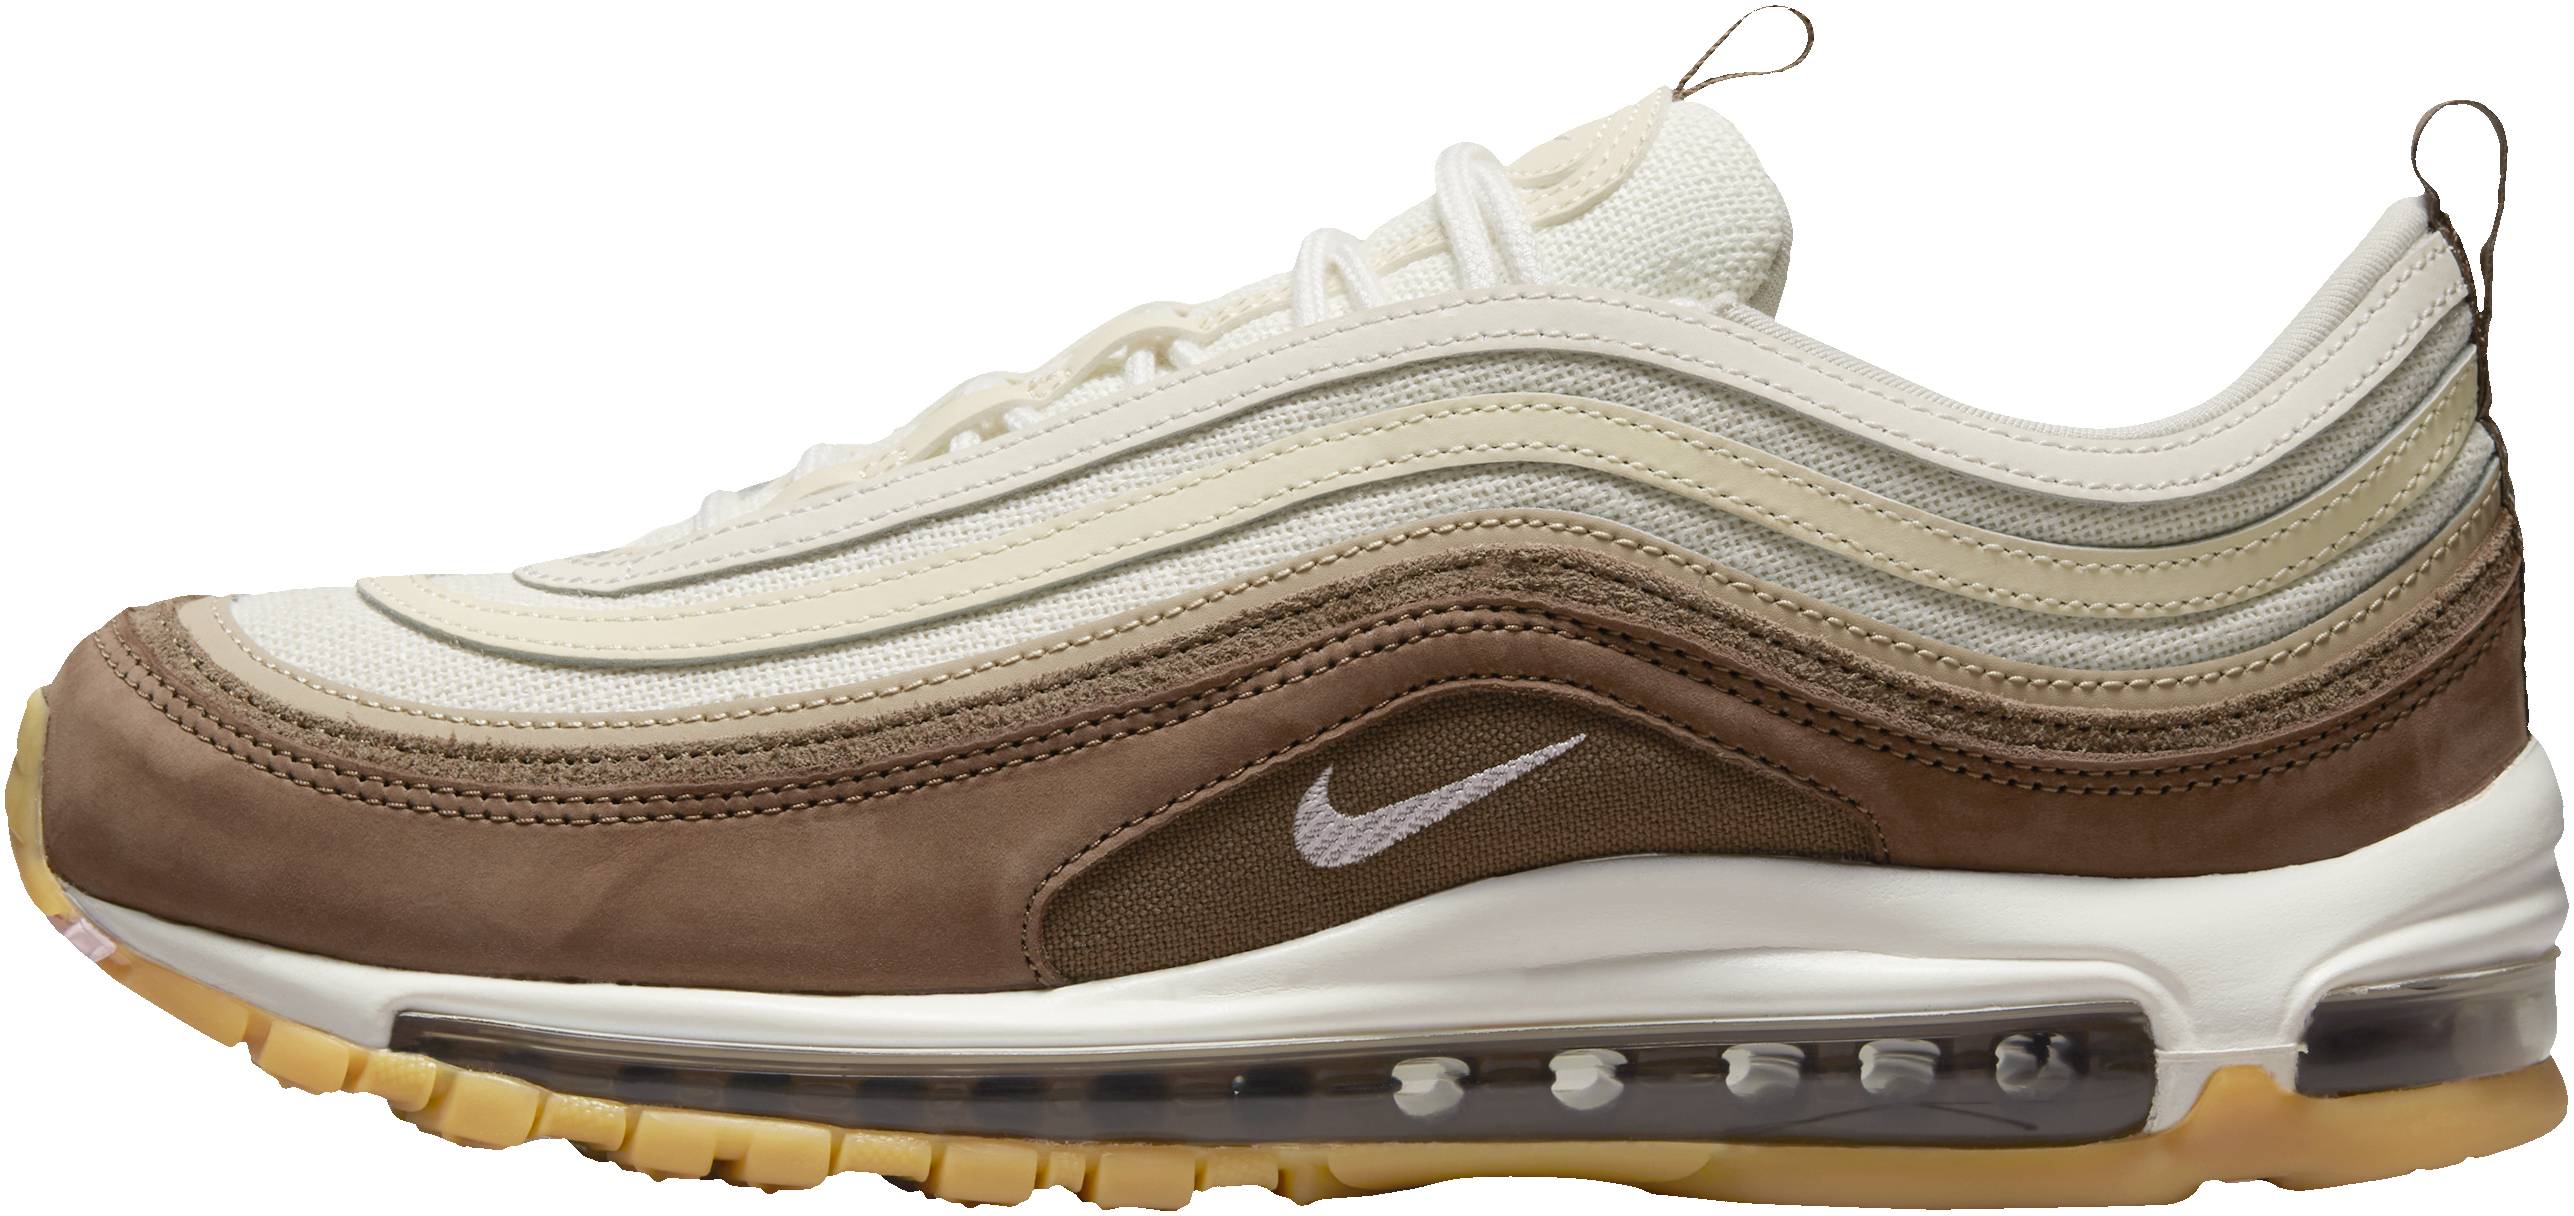 average handling Case 10+ Nike Air Max 97 sneakers: Save up to 35% | RunRepeat